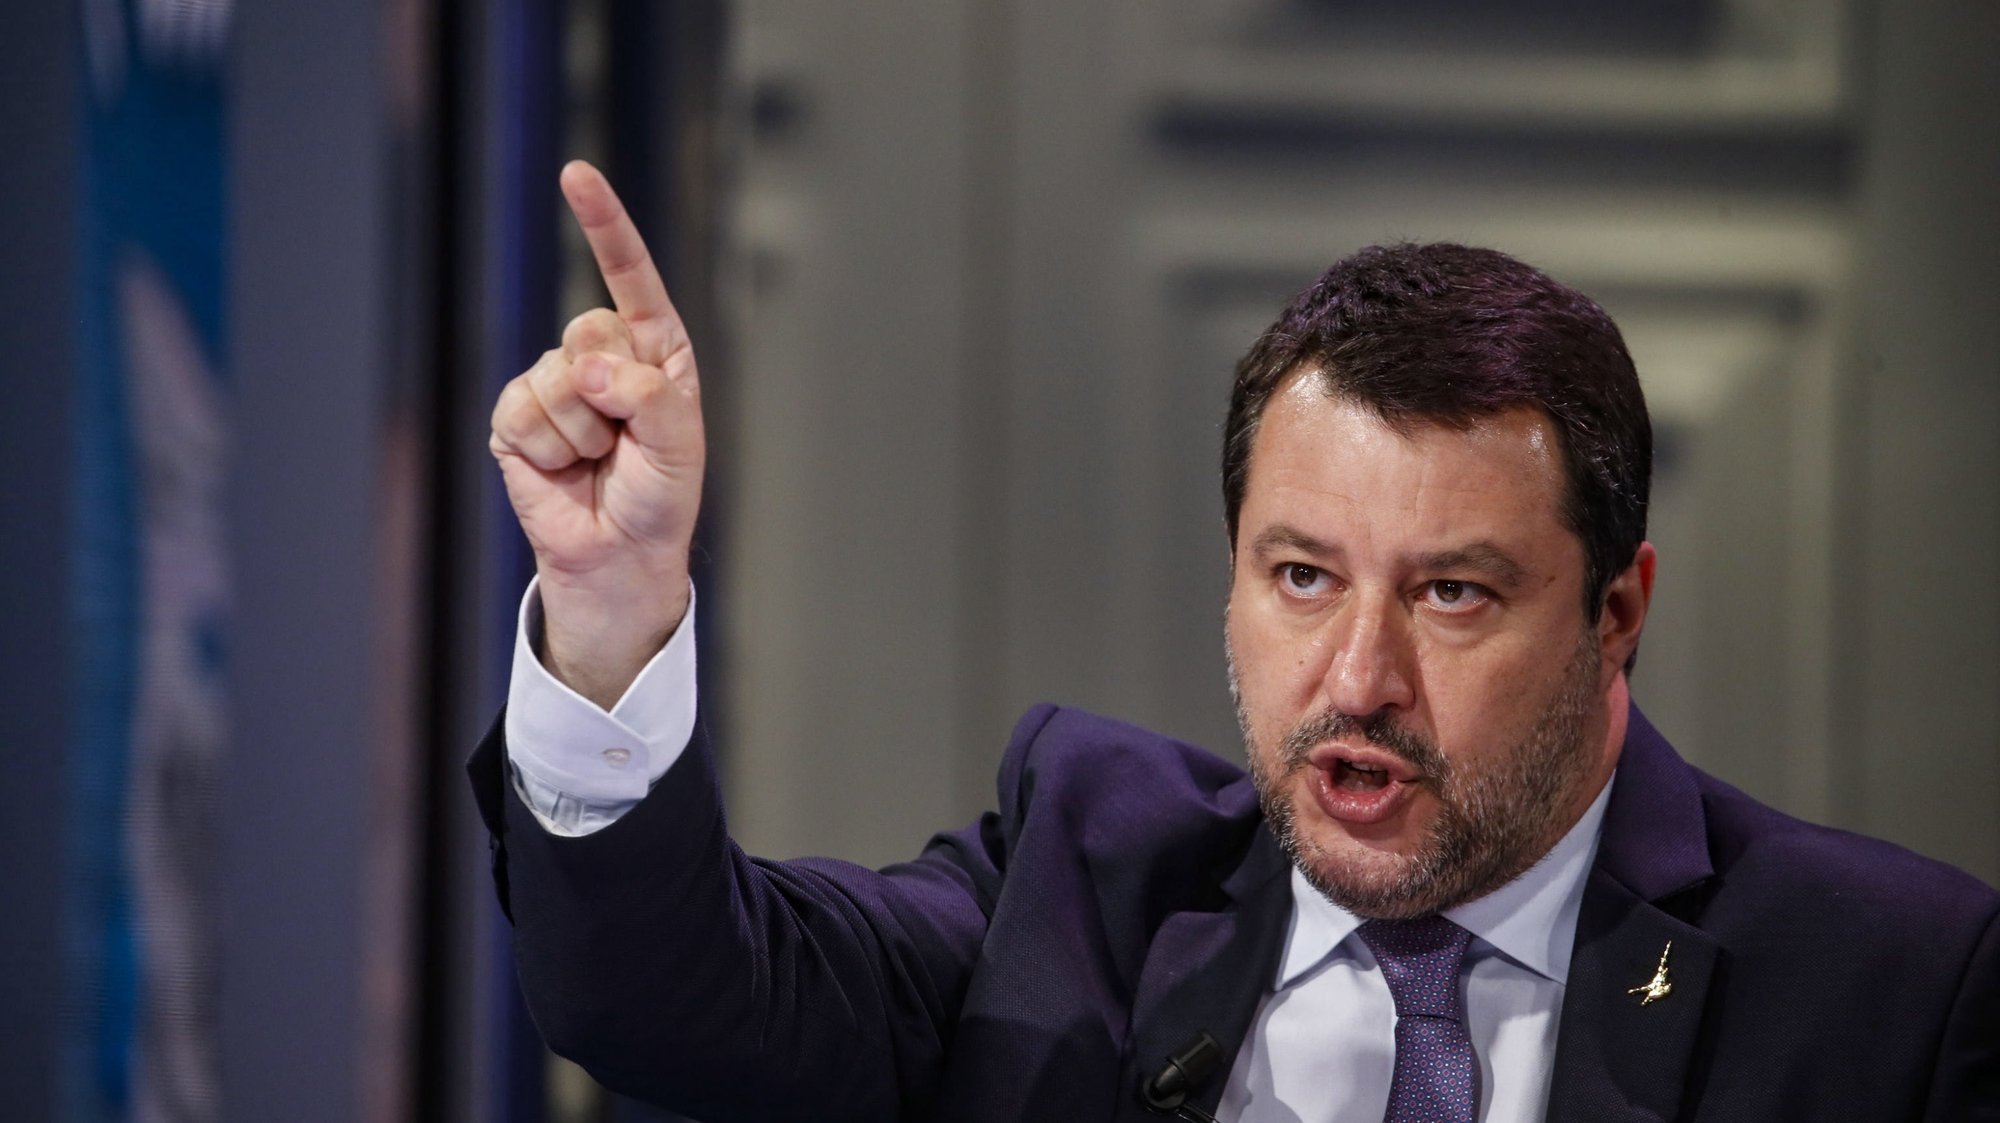 epa09135403 League party leader Matteo Salvini during the broadcast of TV talk show &#039;Porta a Porta&#039;, in Rome, Italy, 14 April 2021. Salvini said his party was demanding from the government to reopen restaurants.  EPA/FABIO FRUSTACI